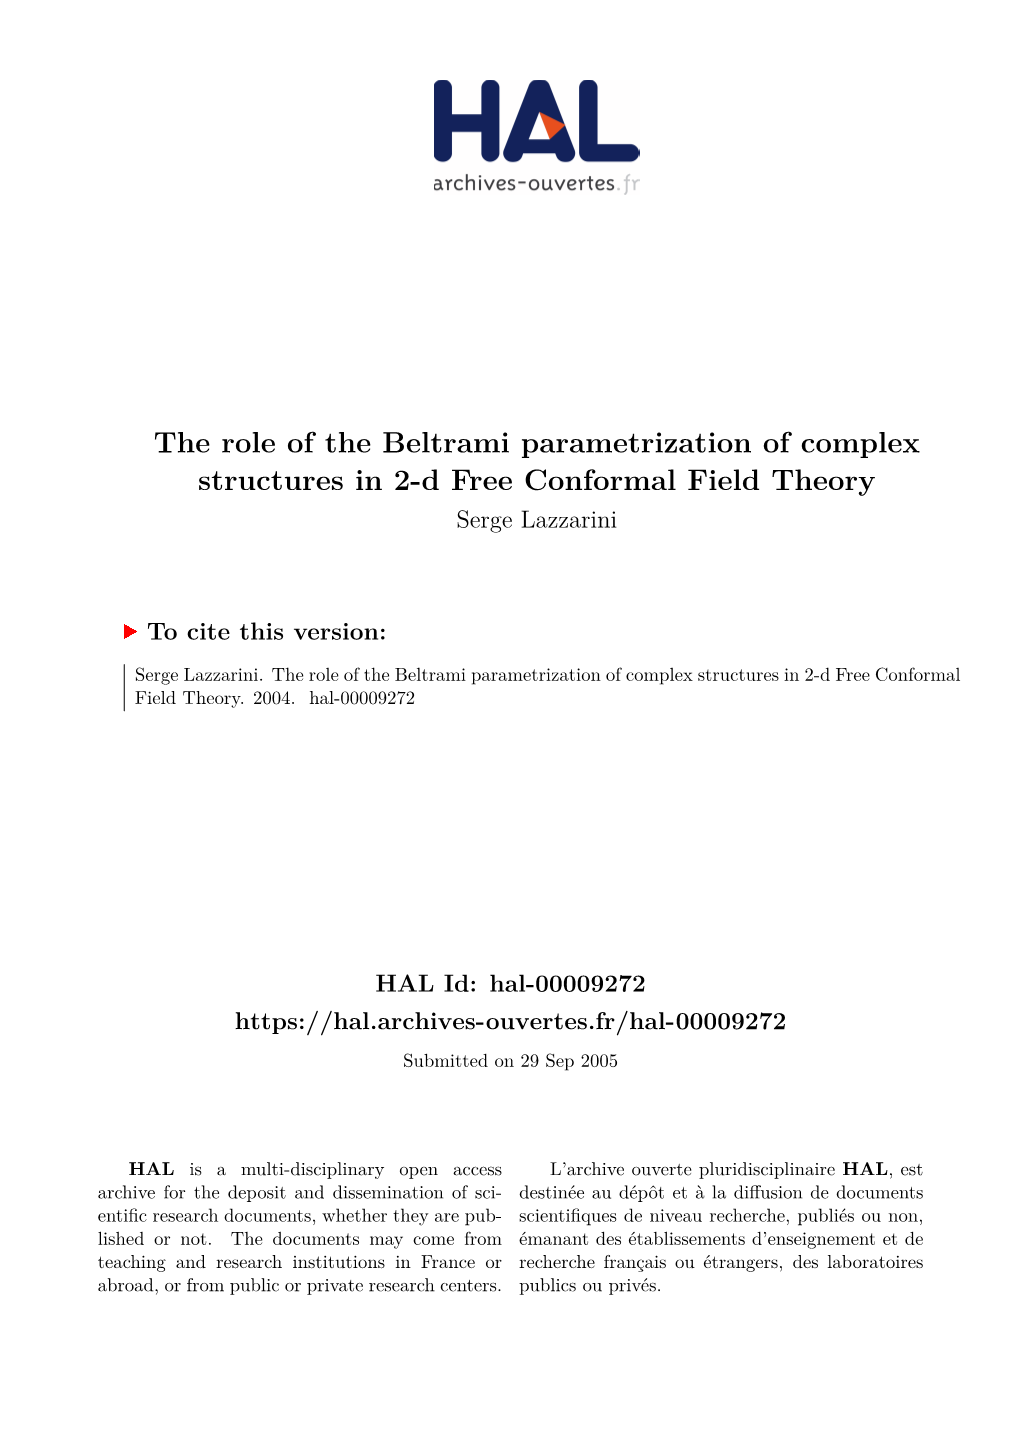 The Role of the Beltrami Parametrization of Complex Structures in 2-D Free Conformal Field Theory Serge Lazzarini